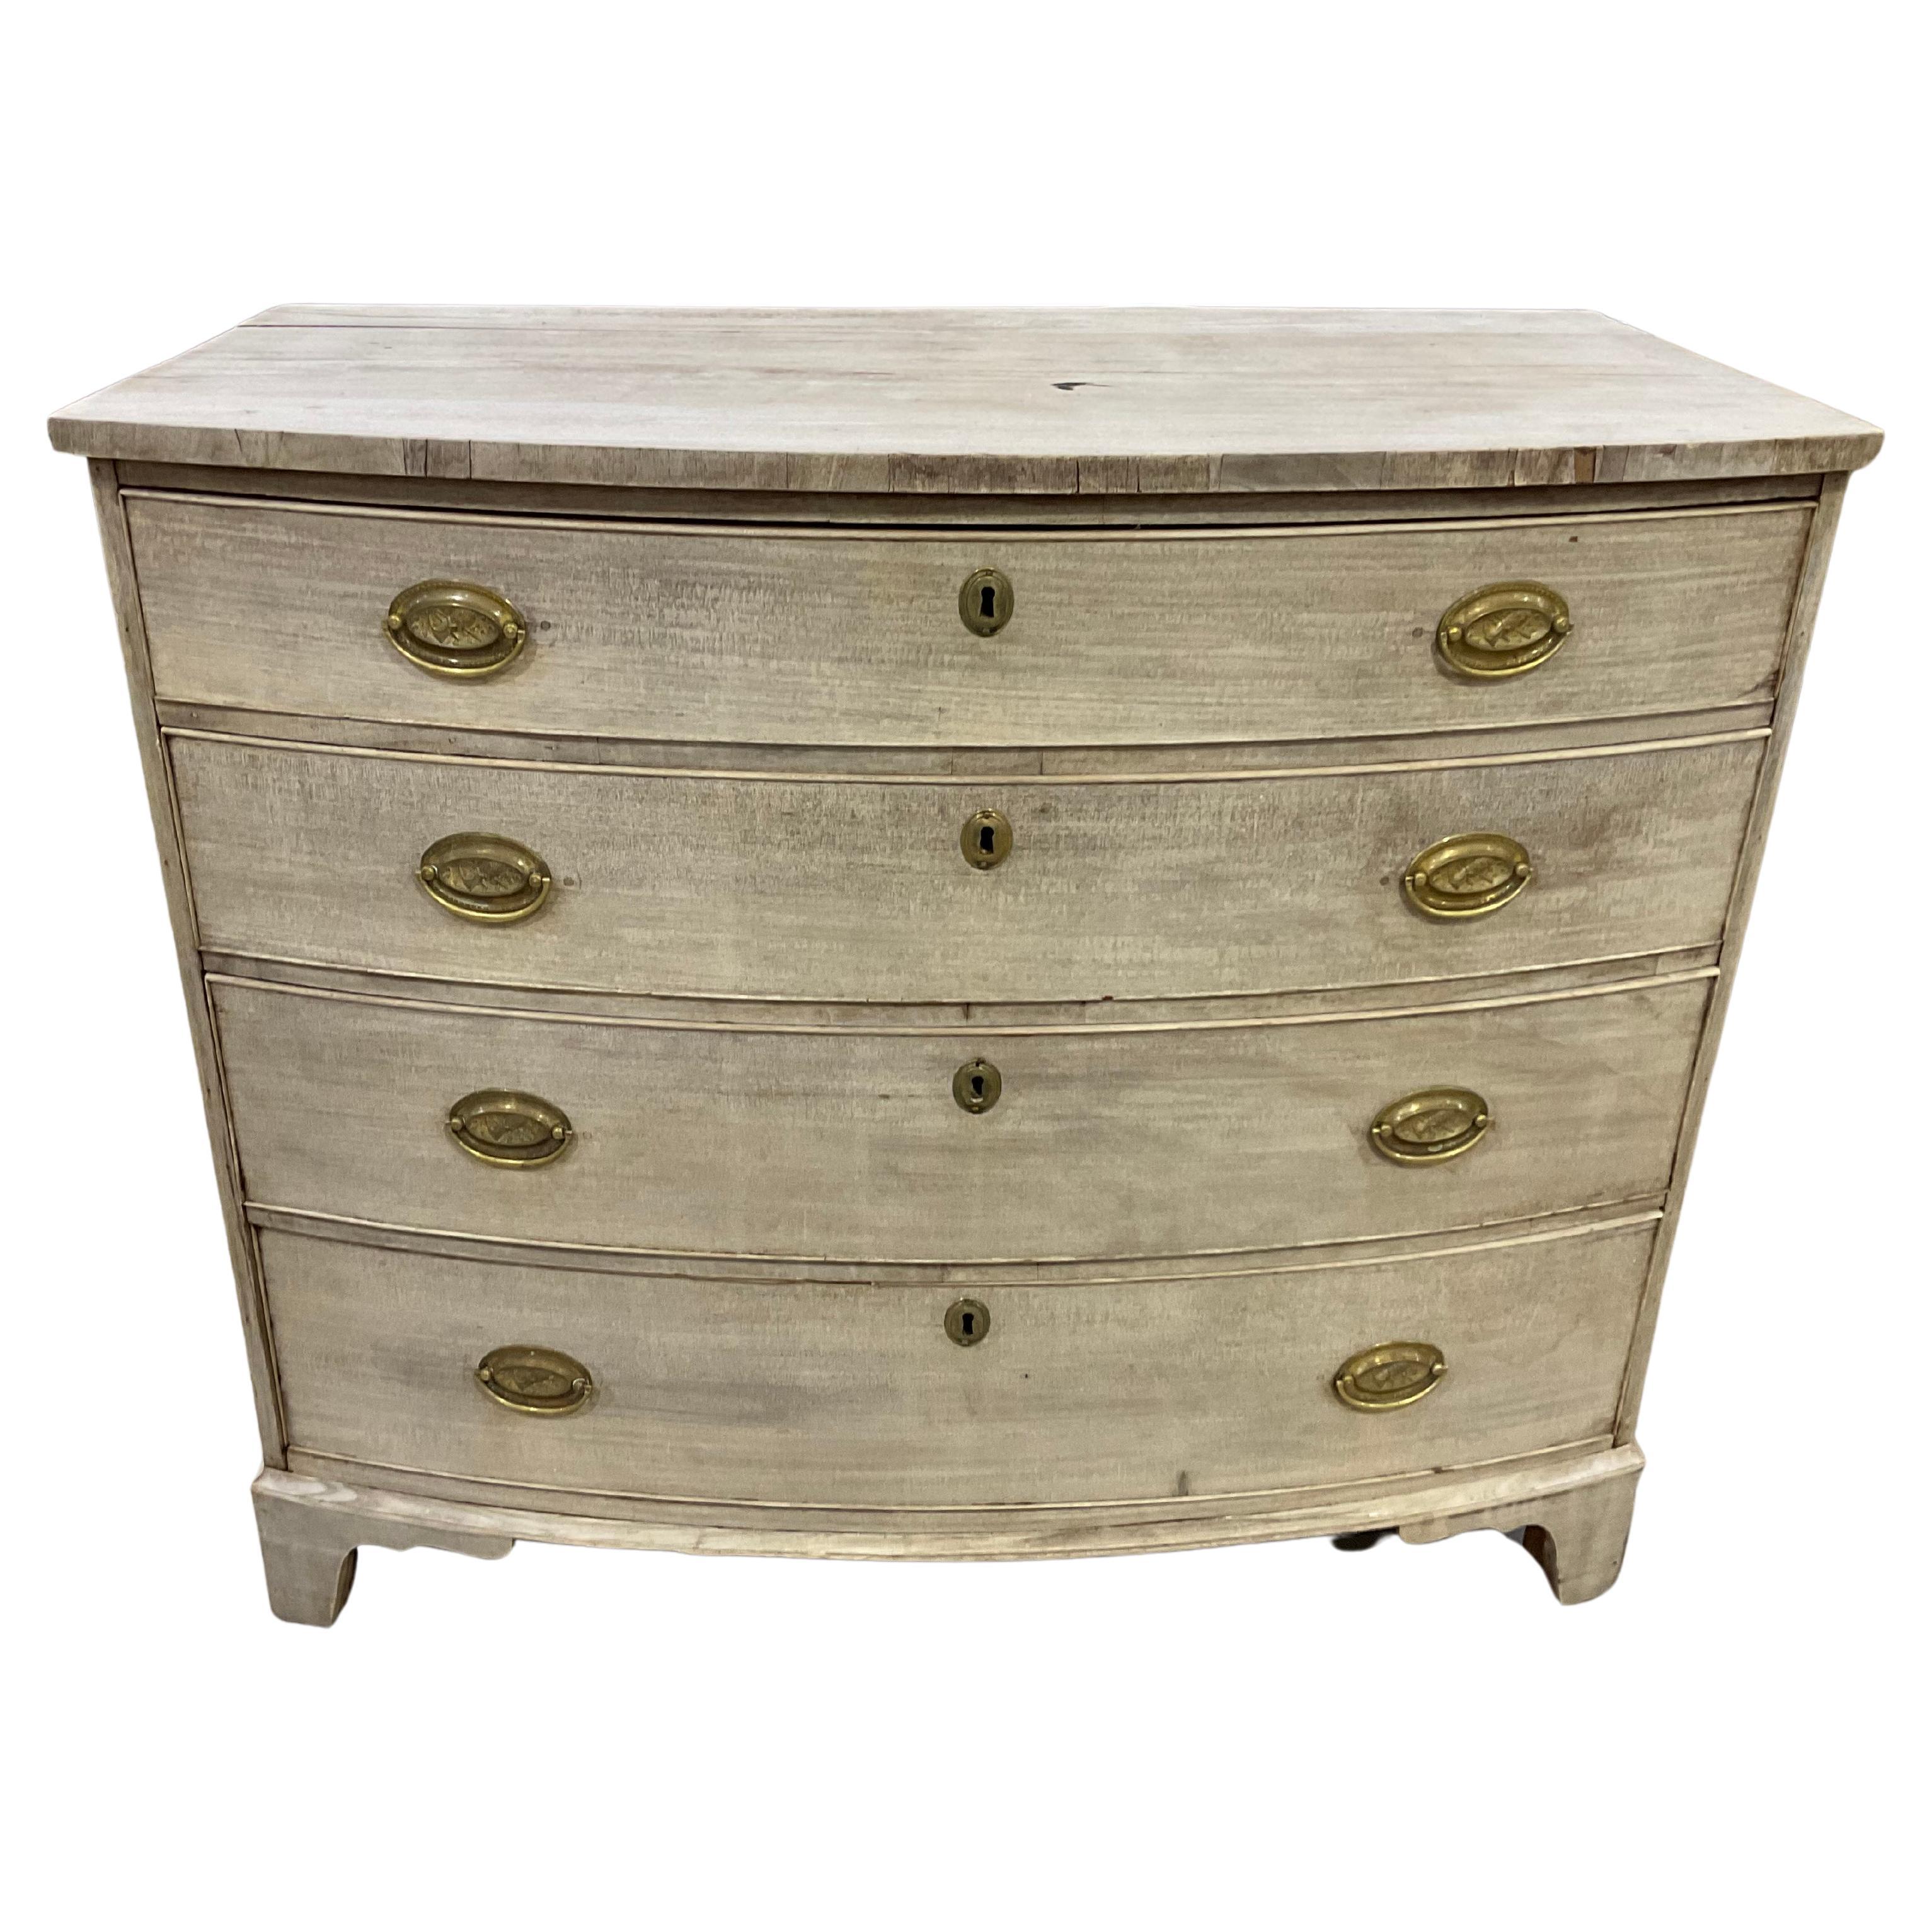 19th Century English Bleached Mahogany Bowfront Chest of Drawers